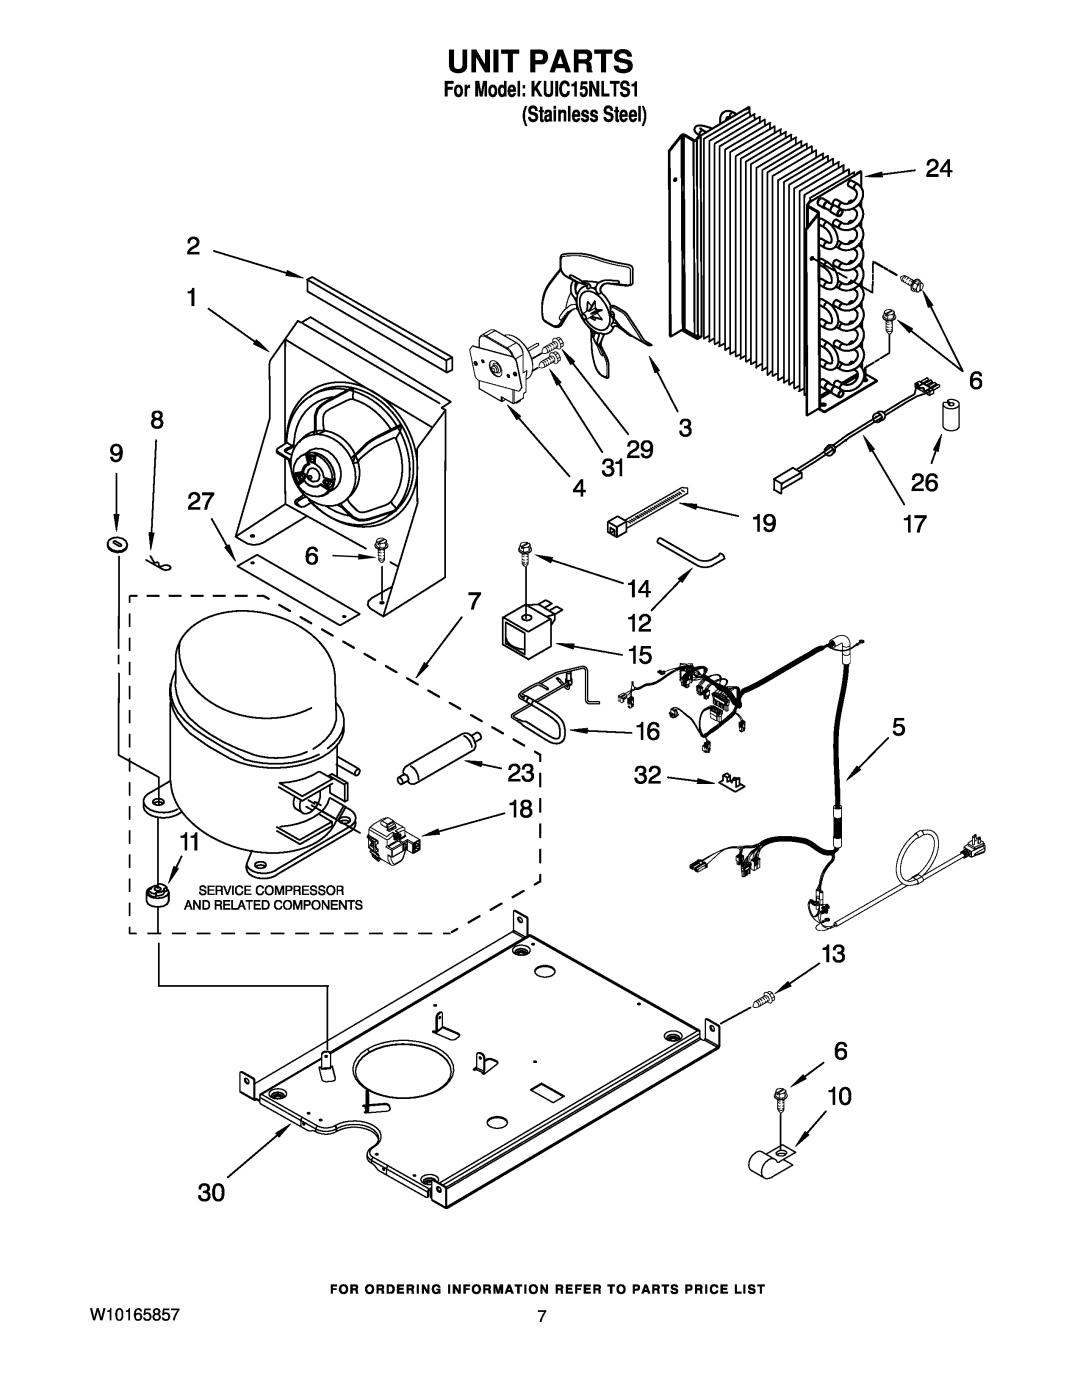 KitchenAid manual Unit Parts, W10165857, For Model KUIC15NLTS1 Stainless Steel 